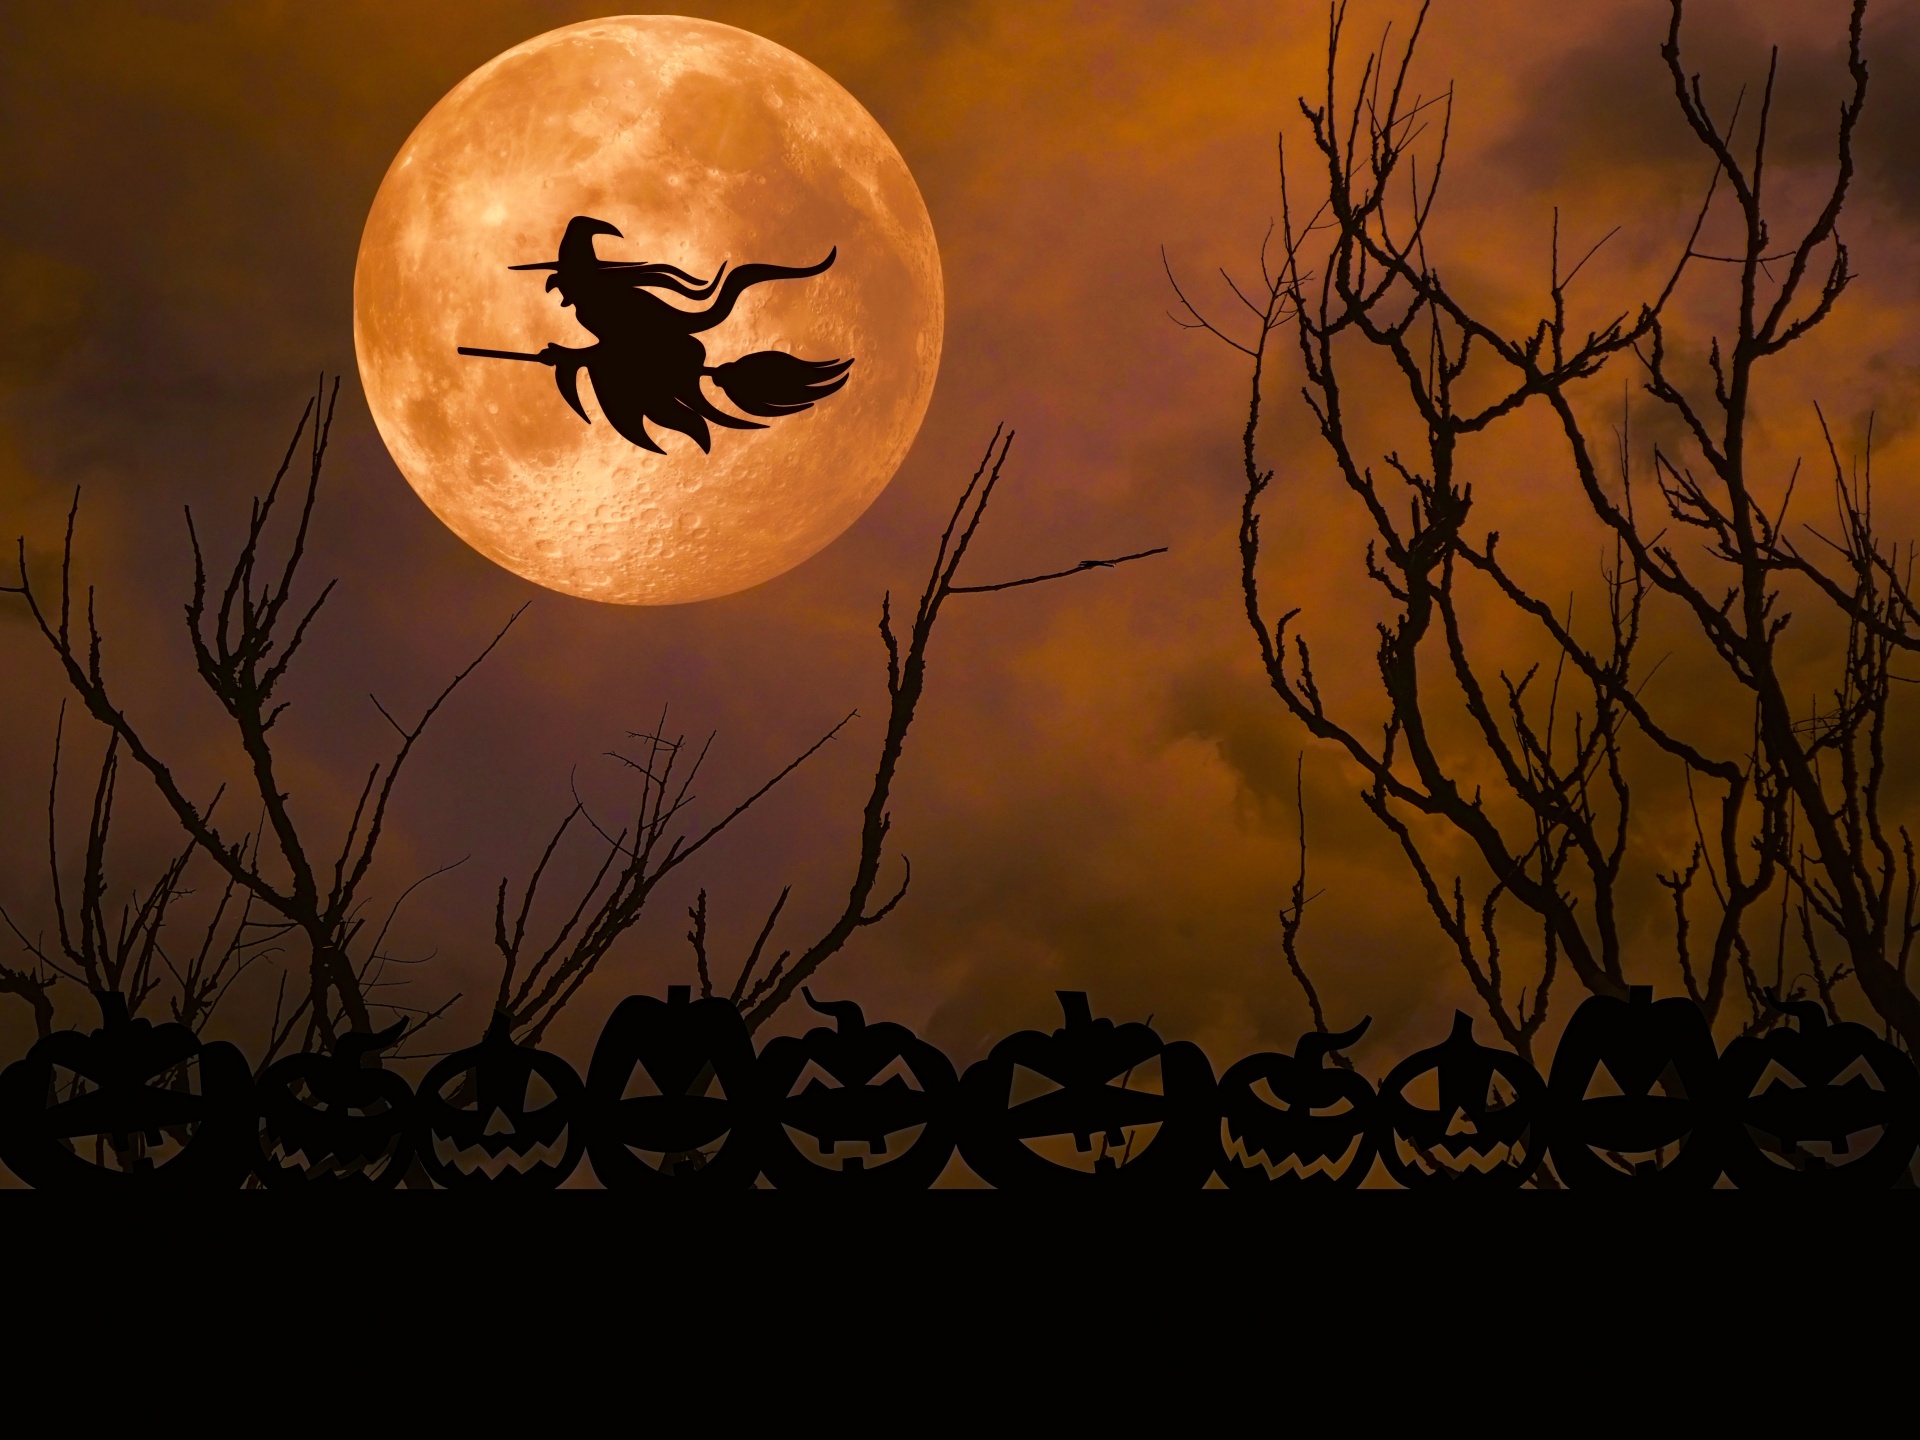 Halloween image of witch silhouetted flying in front of full moon with evil pumpkins at base